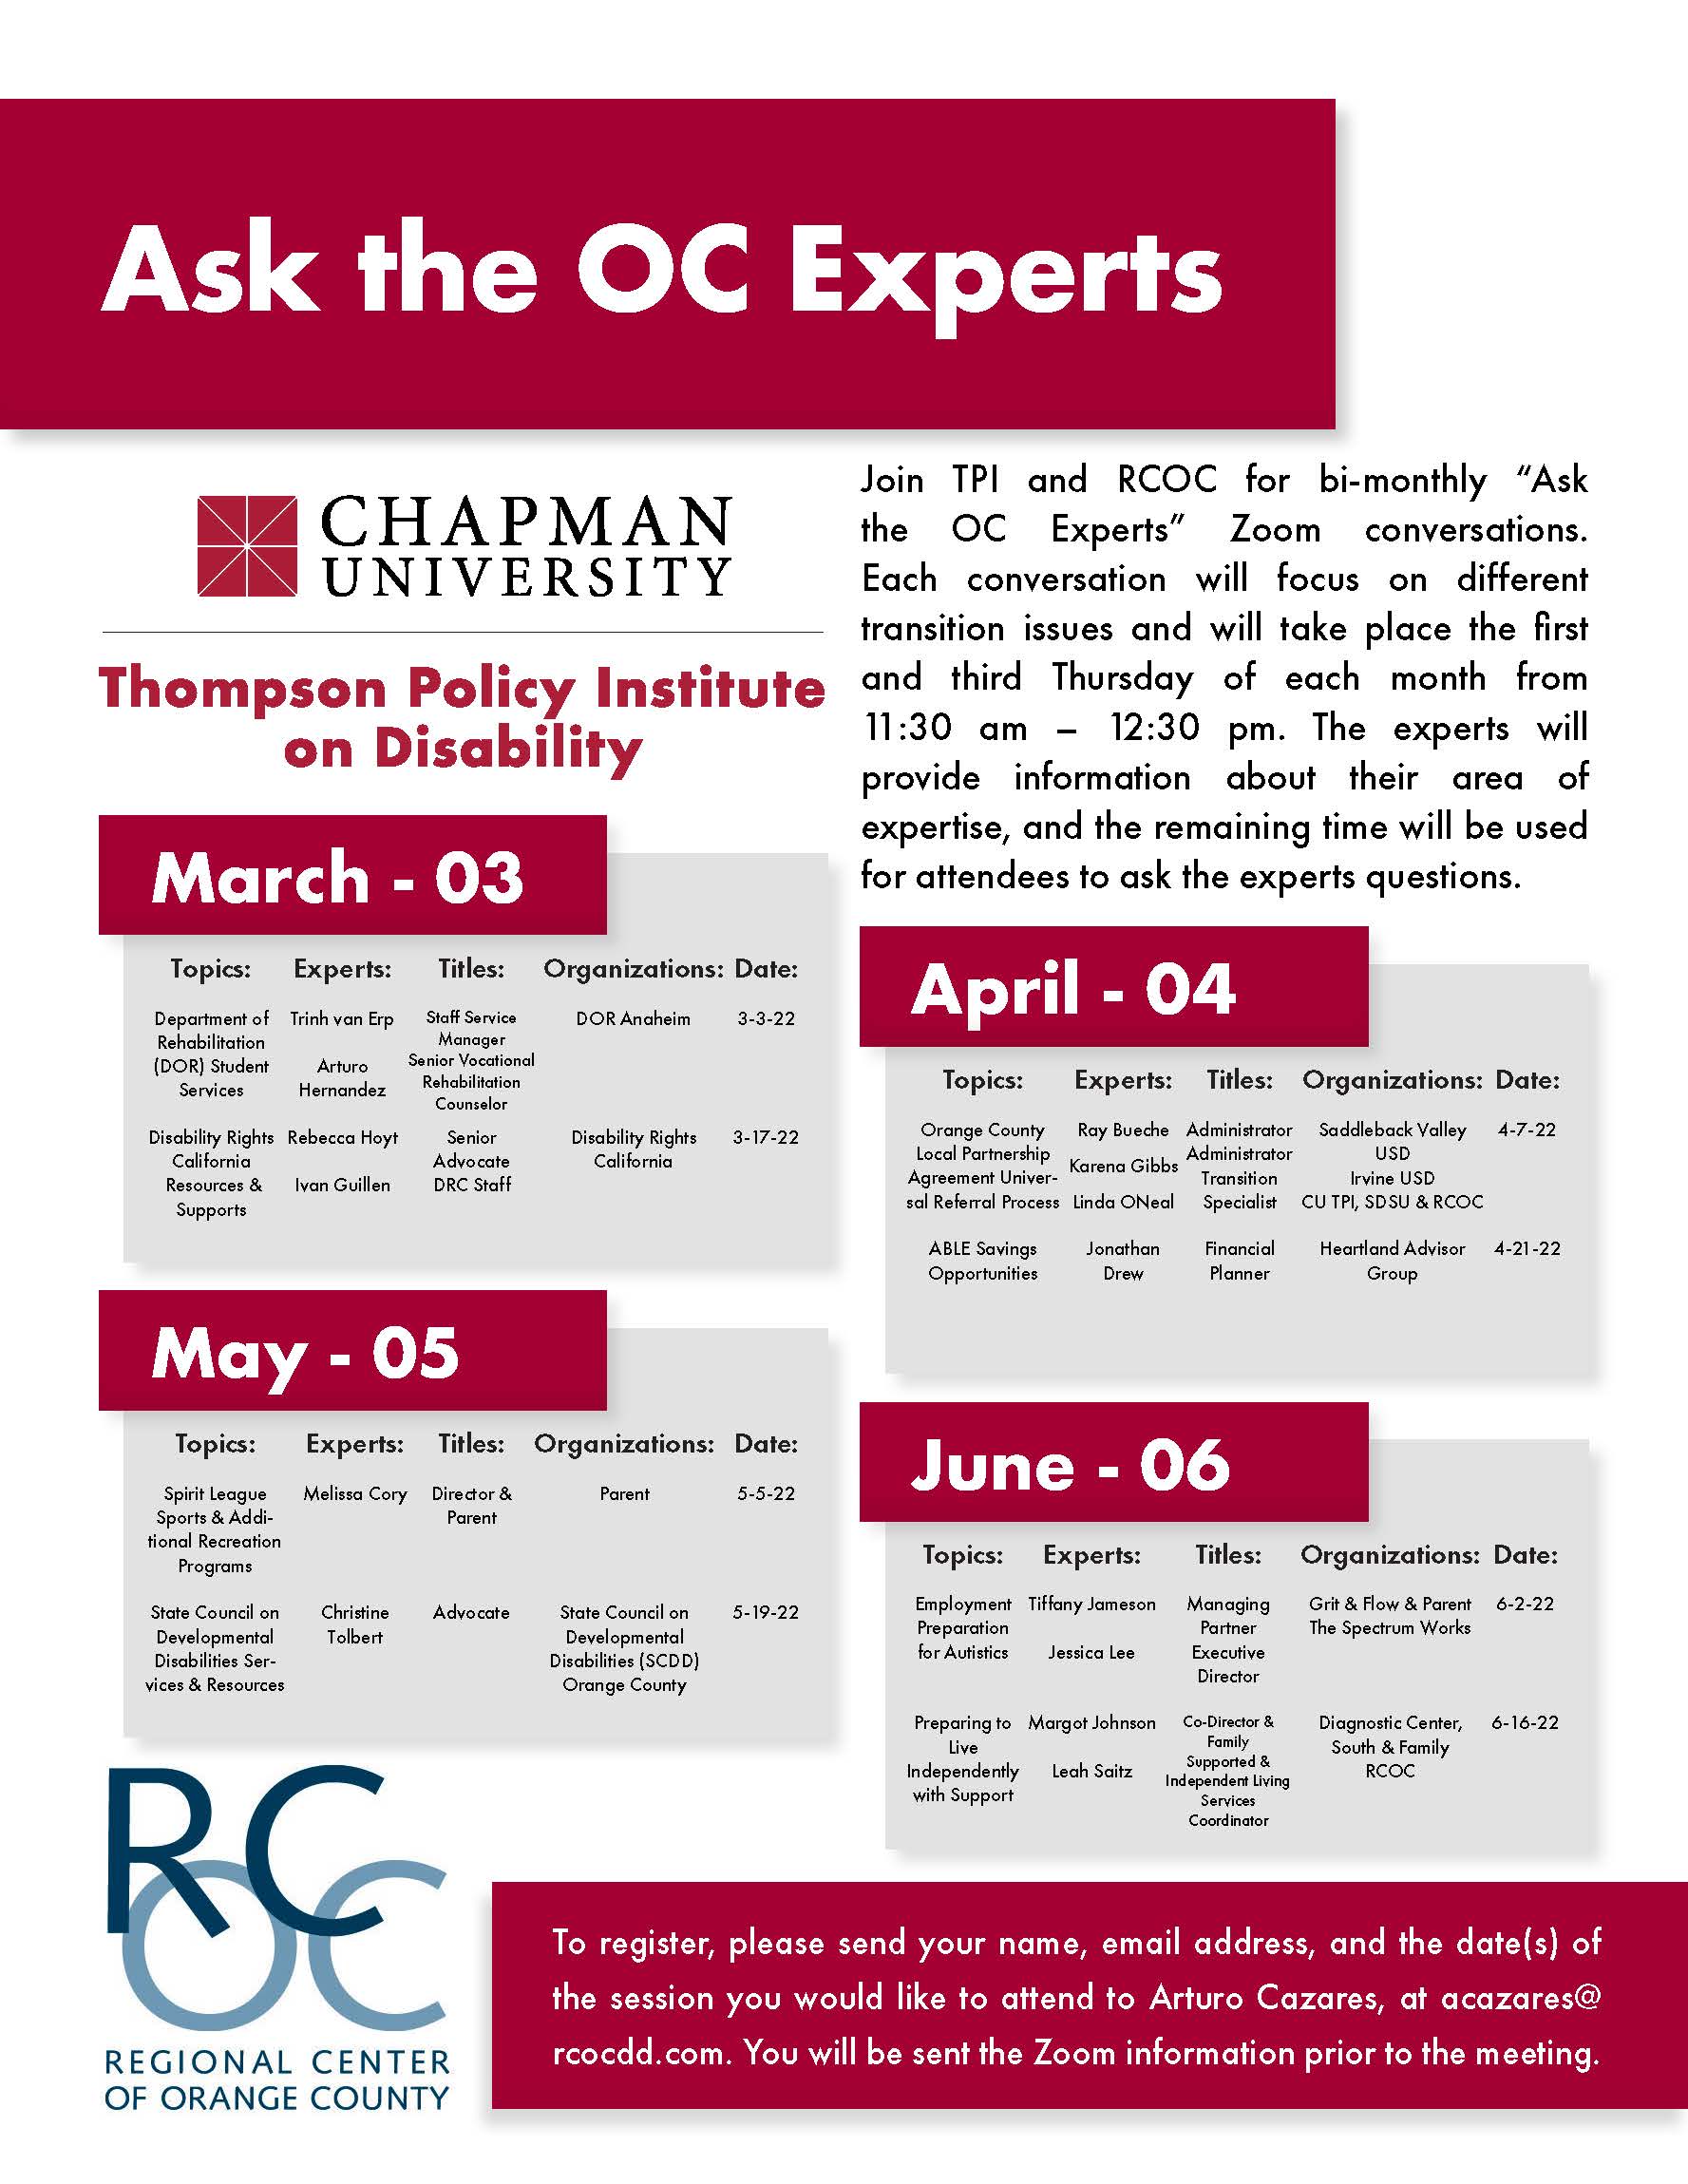 Flyer showing the different dates for Ask the OC Experts zoom meetings